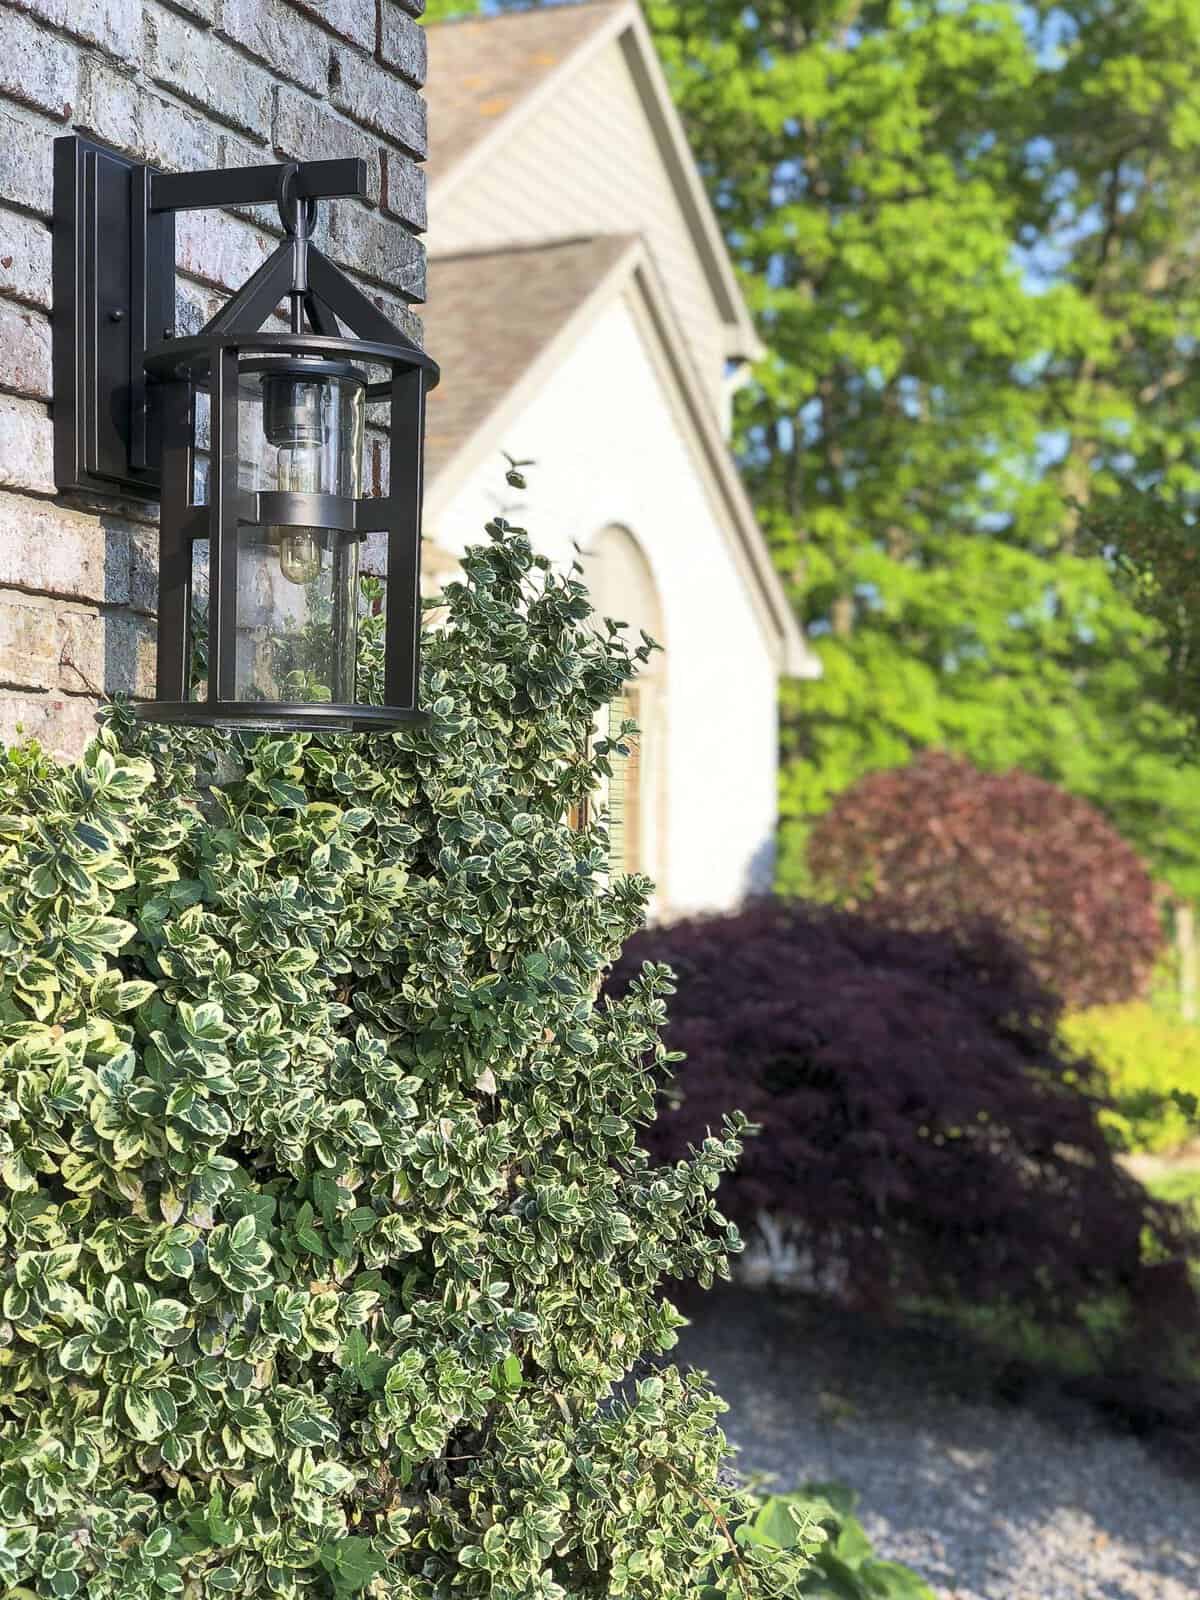 Are you looking for an easy and affordable way to update your home exterior? I modernized our 1990s ranch in one afternoon with affordable modern farmhouse outdoor lighting! Read more to see the transformation!